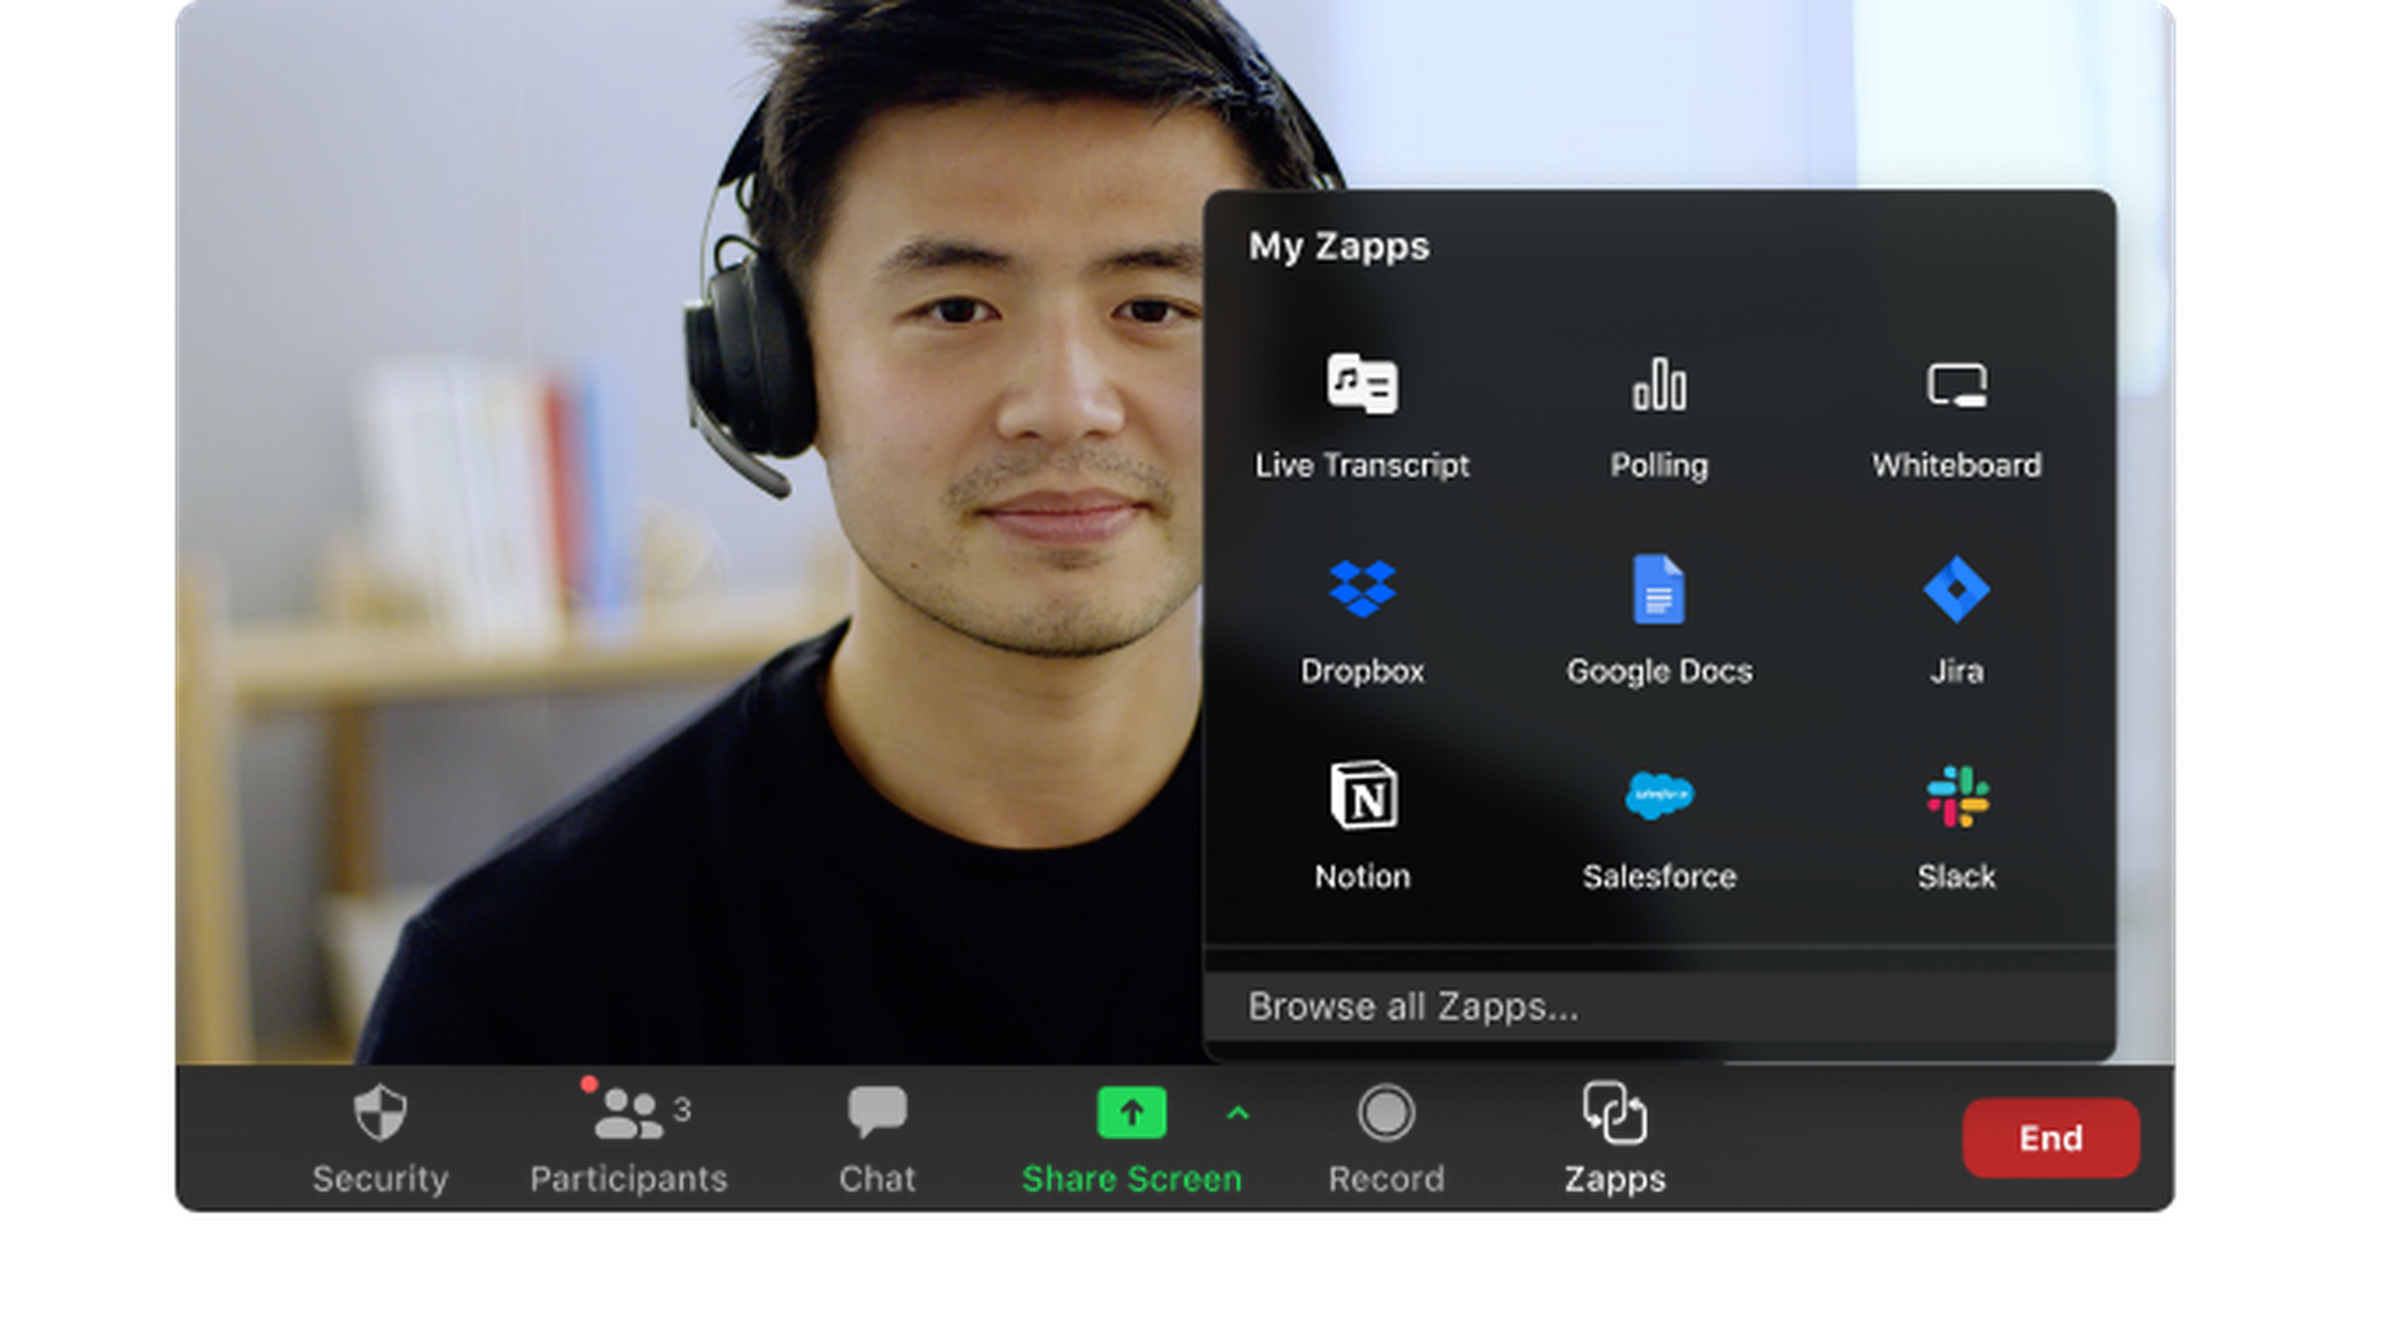 Zoom’s third-party app integrations (“Zapps”) will be available in the main taskbar during calls. 